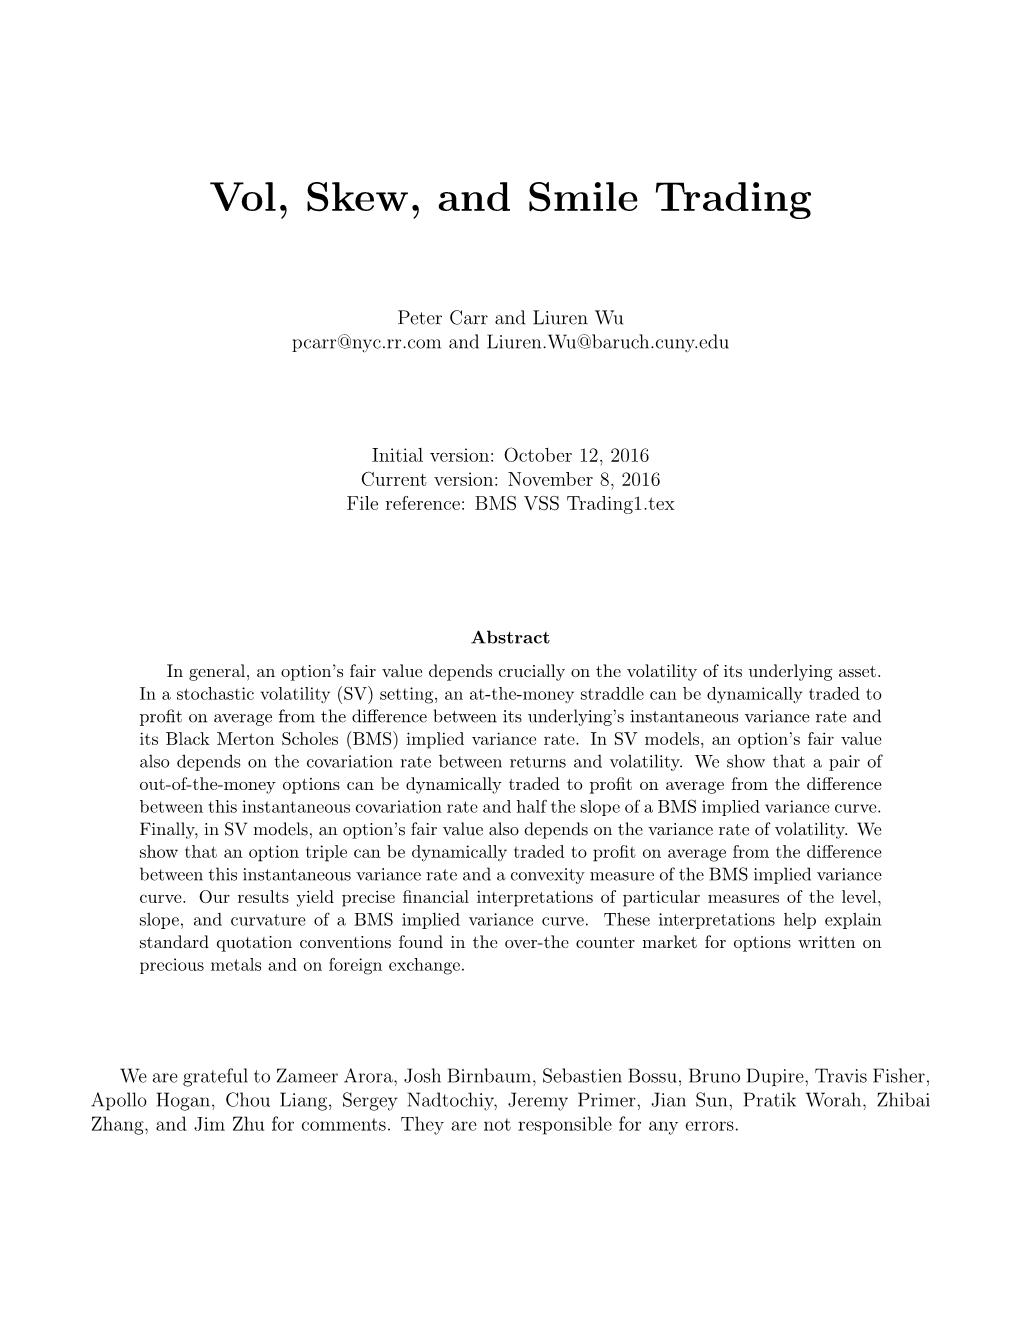 Vol, Skew, and Smile Trading